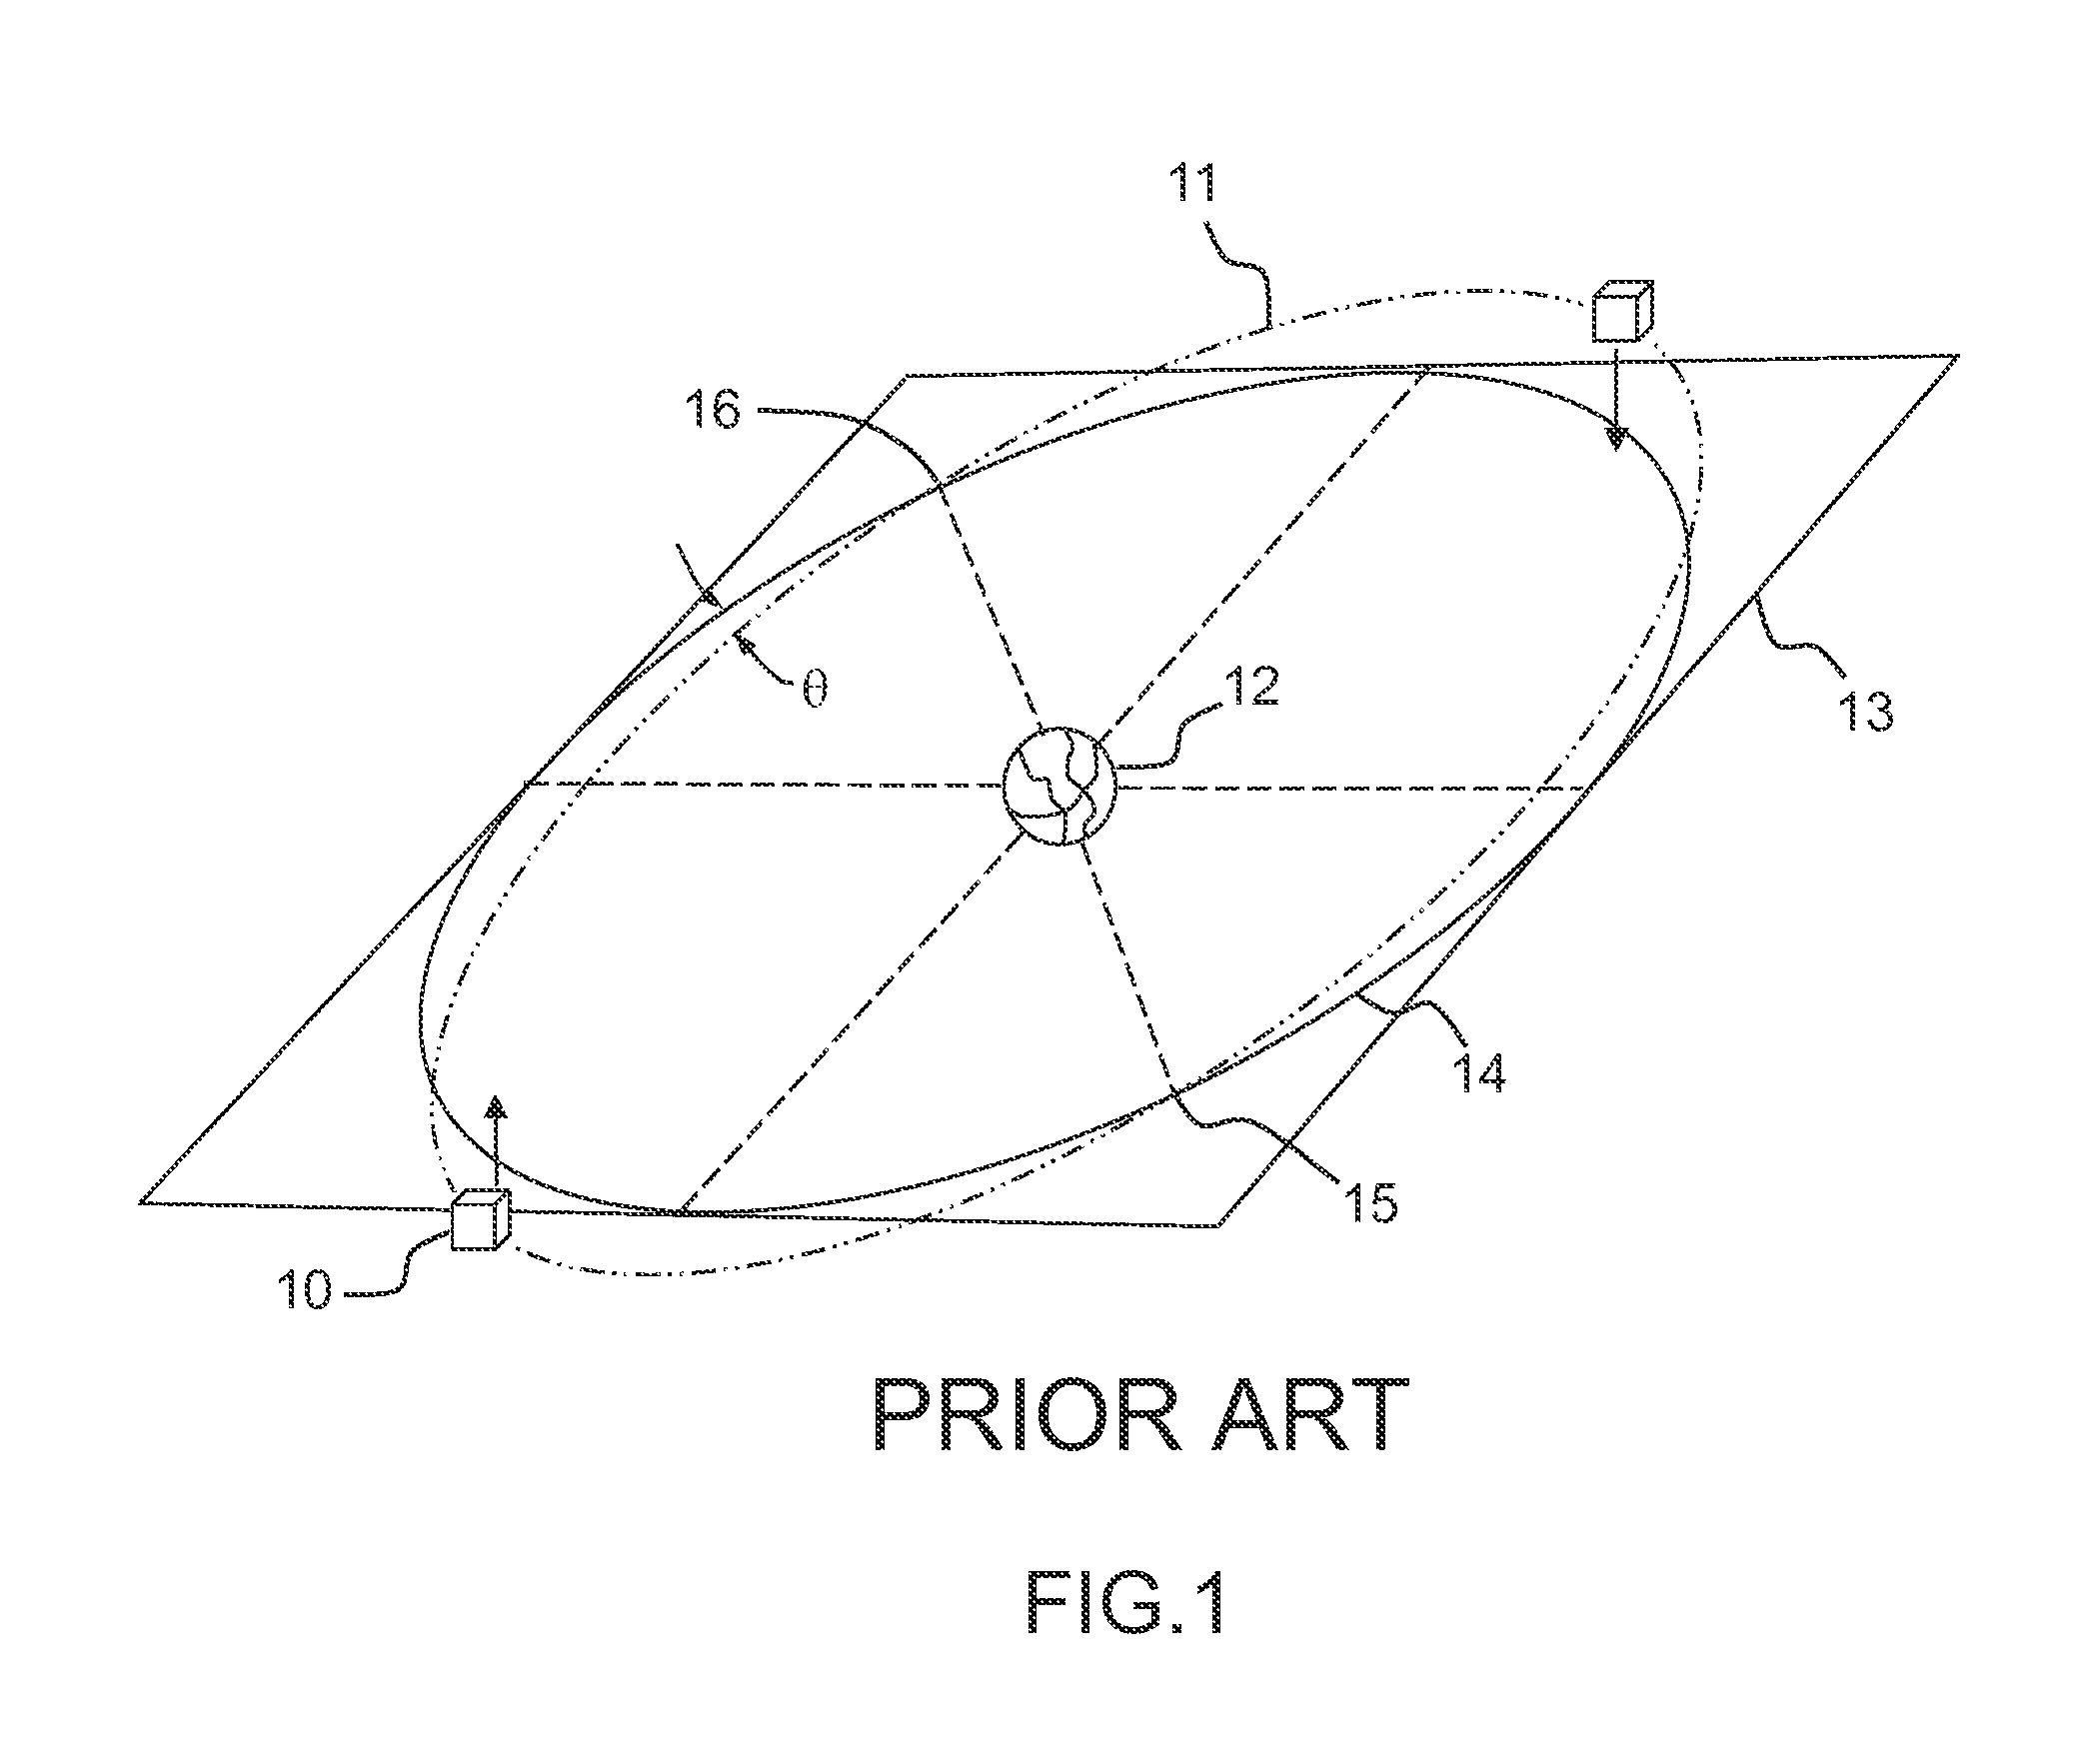 Propulsion system with four modules for satellite orbit control and attitude control